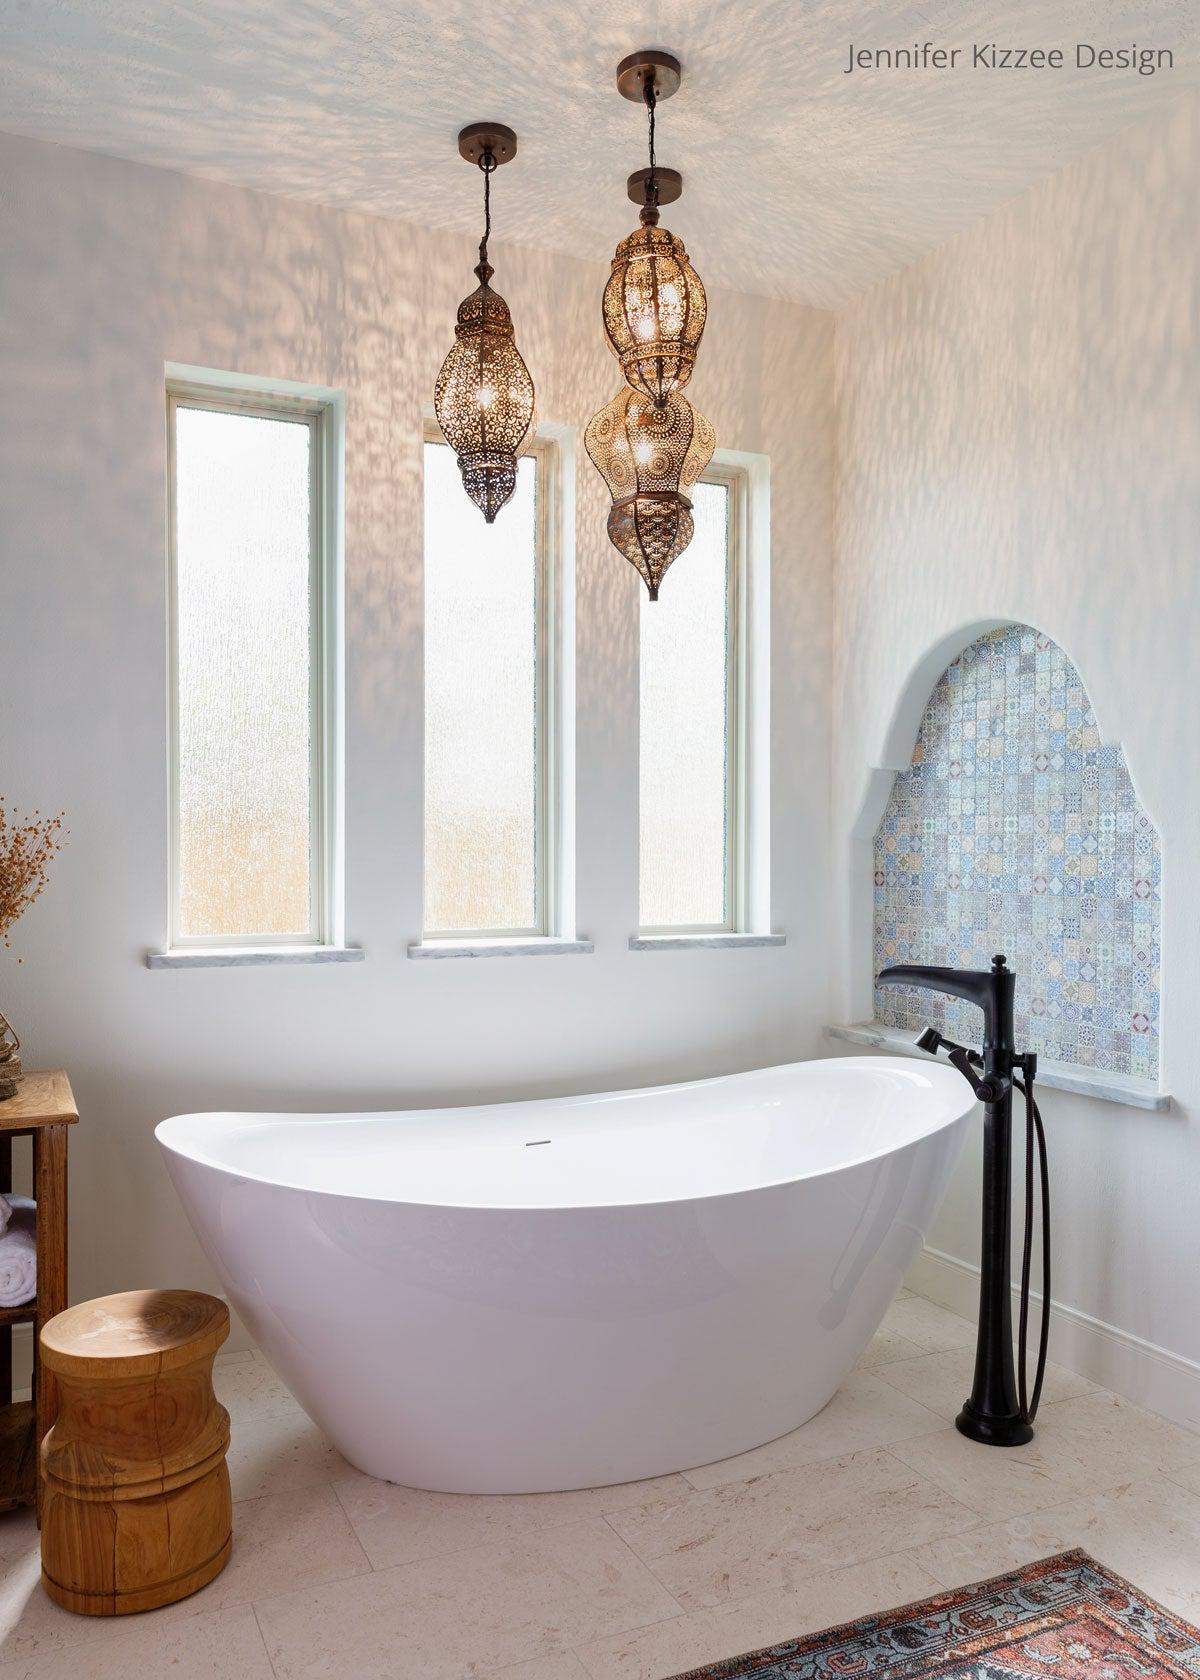 Moroccan Bathroom with a Decorative Tile Niche behind the Standing Tub